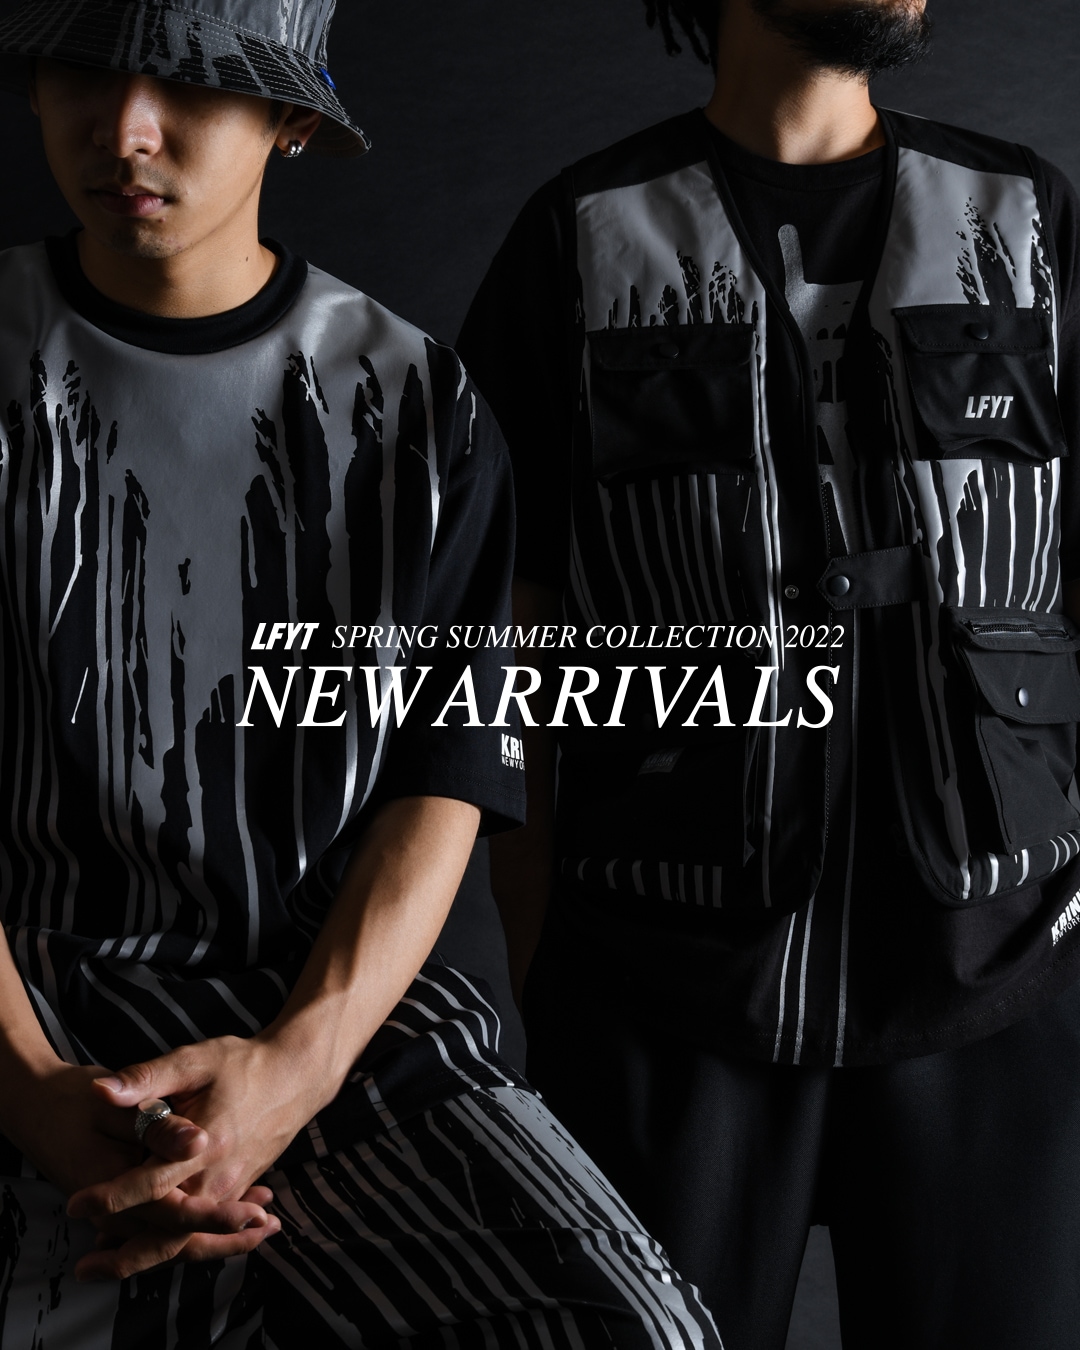 new arrival